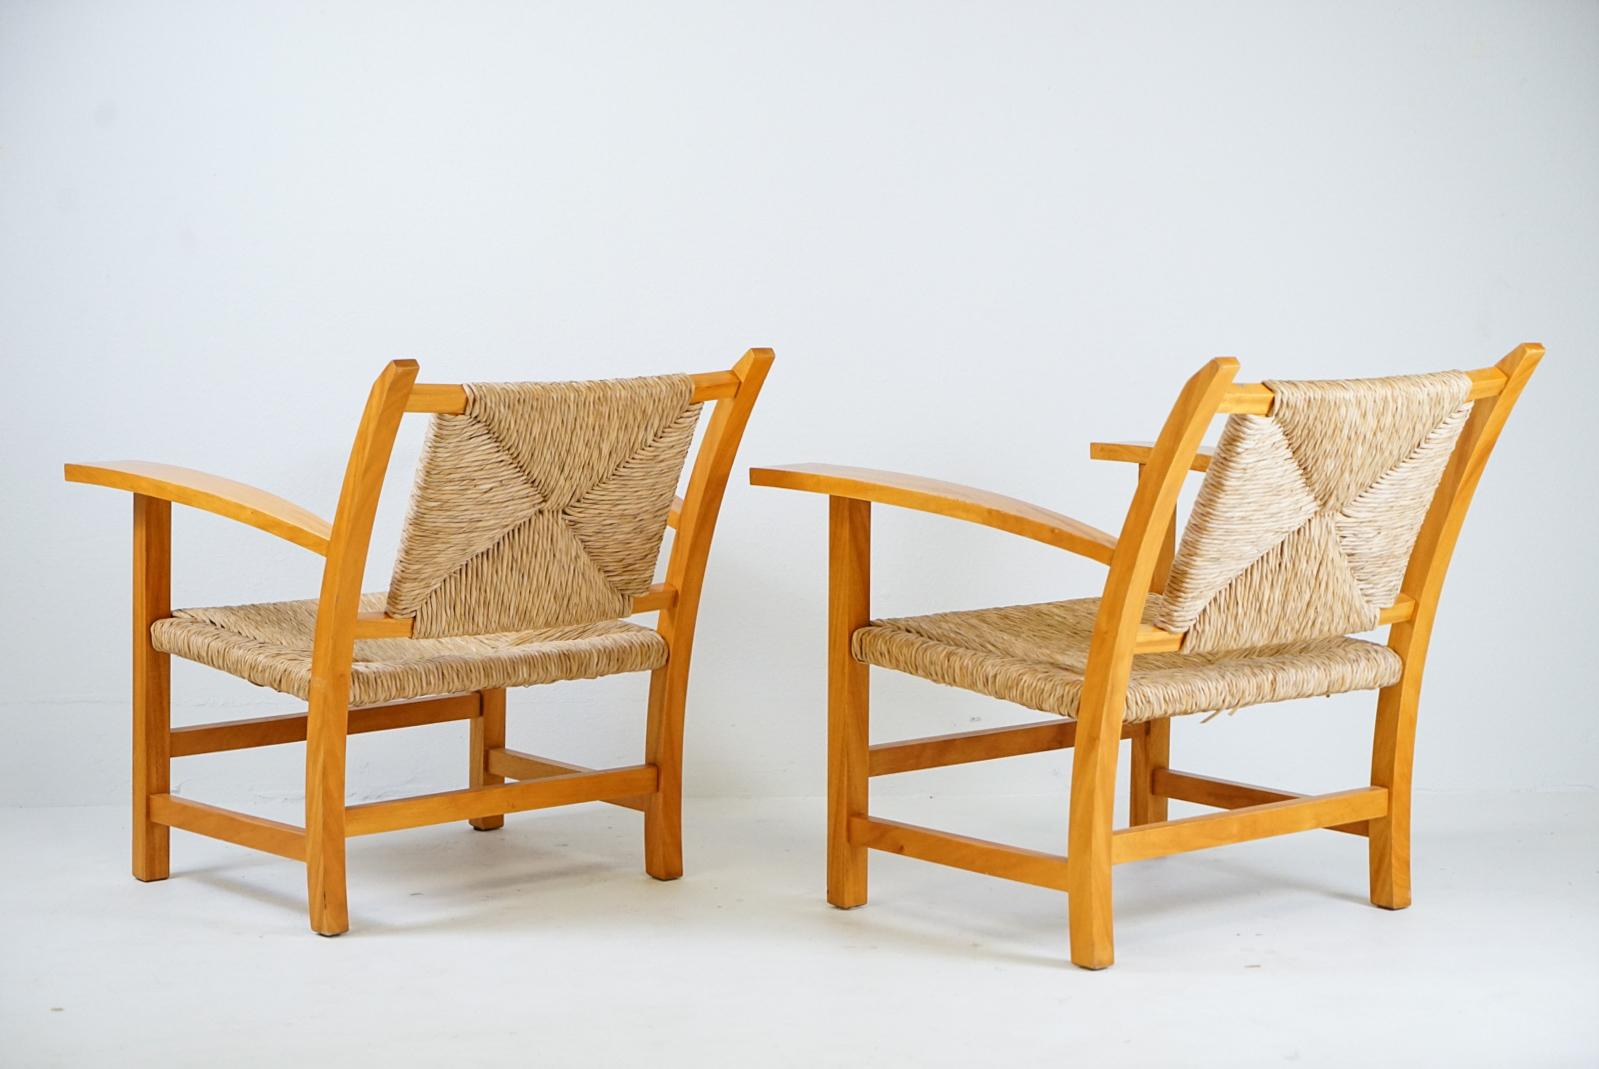 20th Century Francis Jourdain Attributed Pair of Lounge Chairs